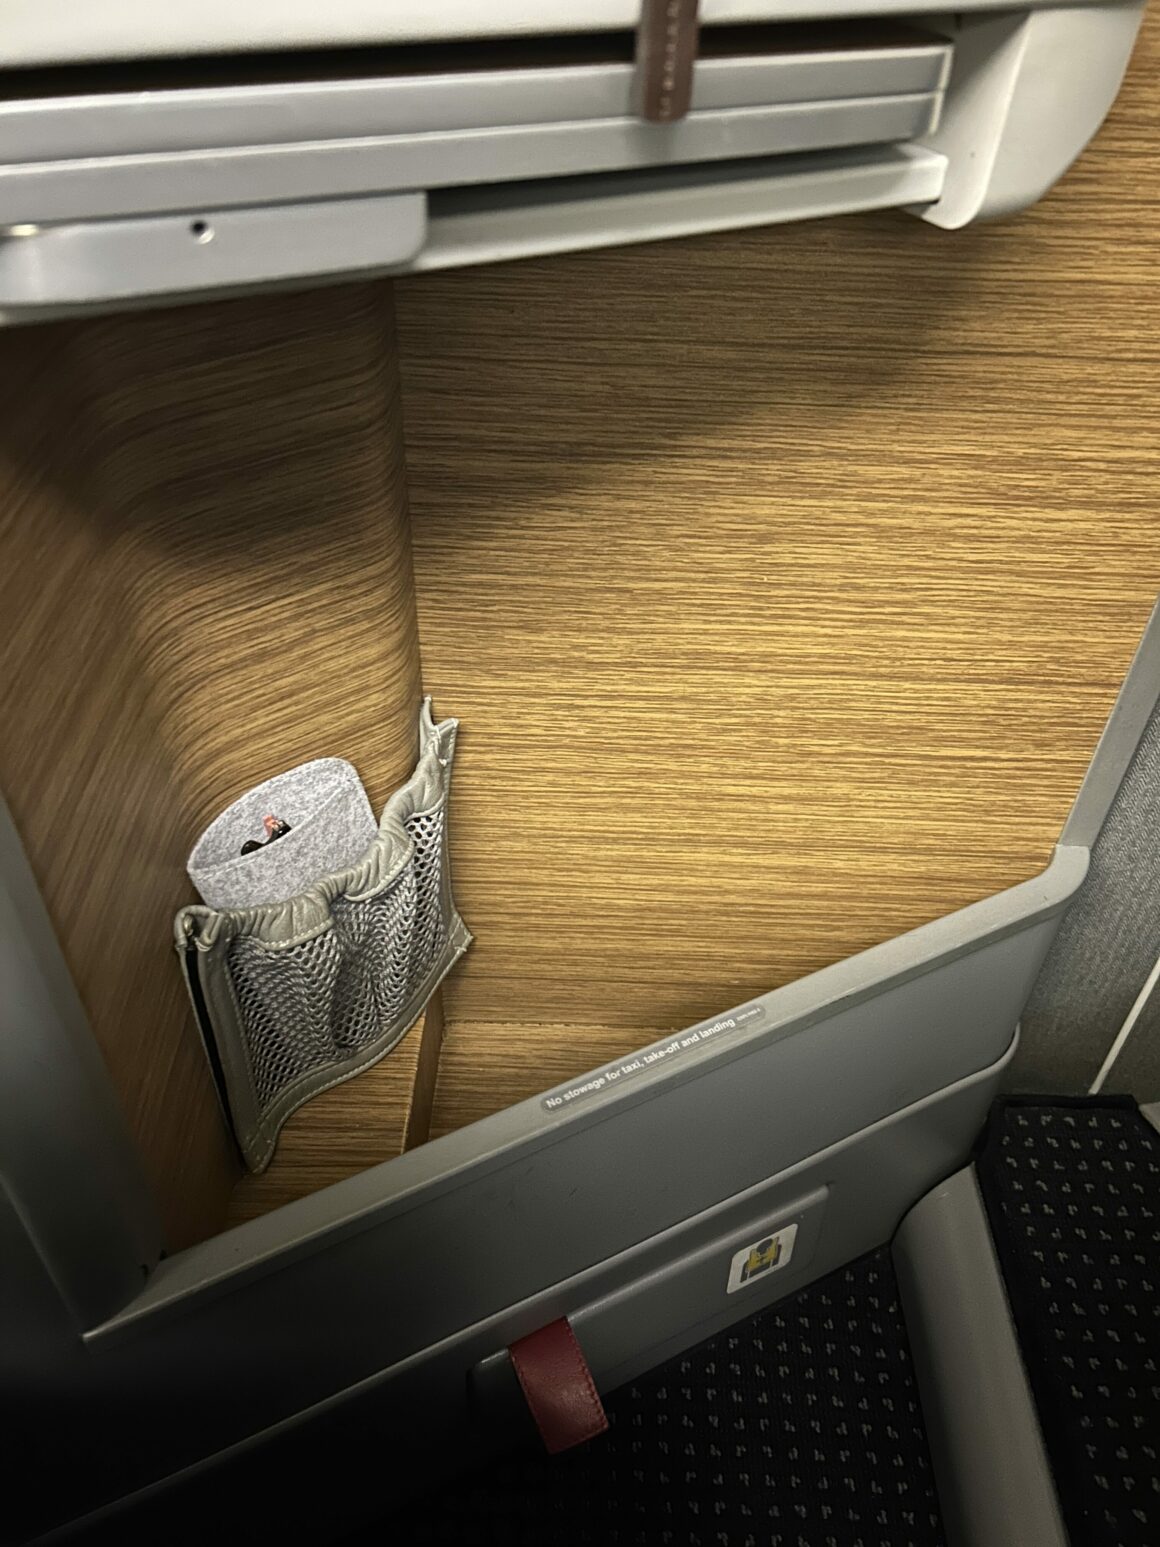 American Airlines B777-300ER Business Class storage in the seat 